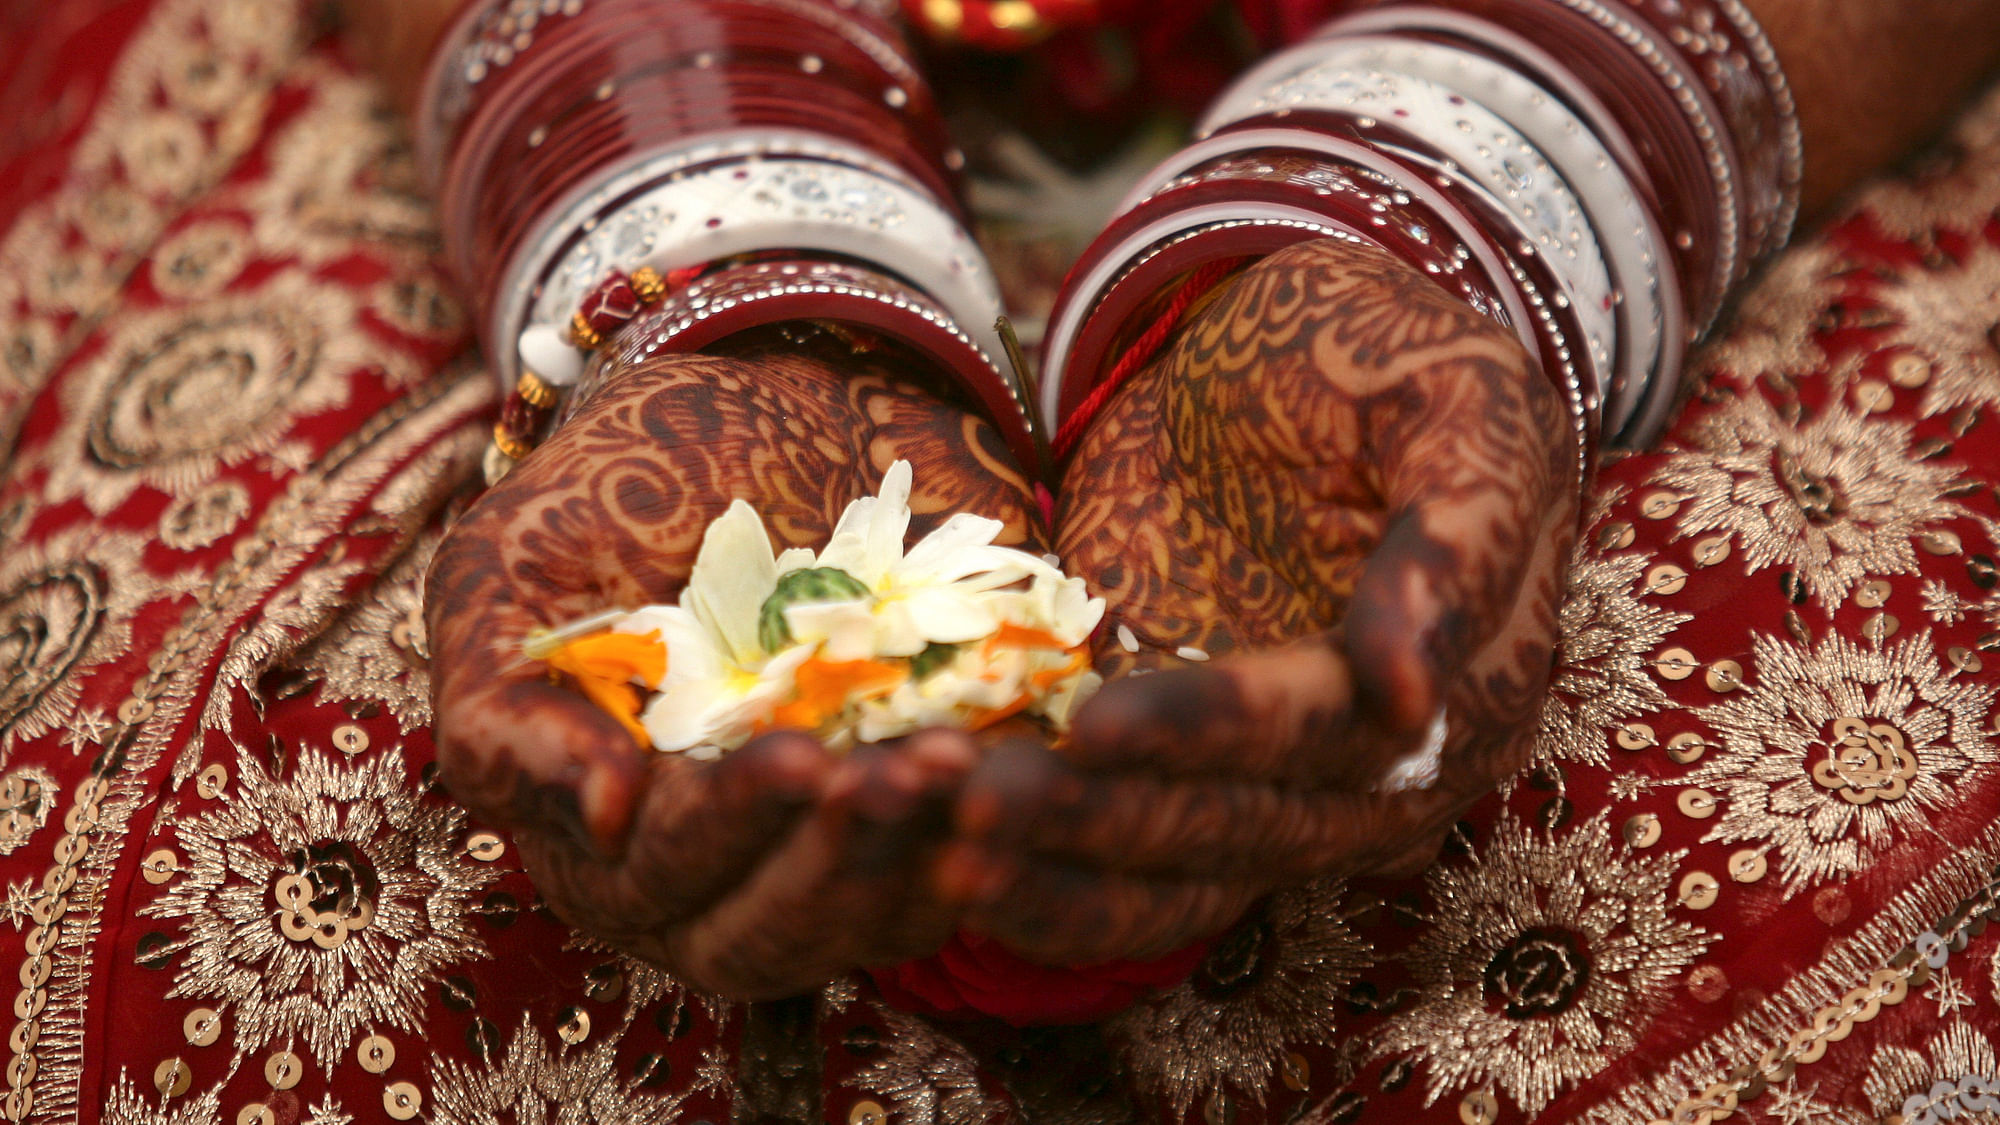 A bride holds flowers with her hands decorated with henna paste during her wedding ceremony